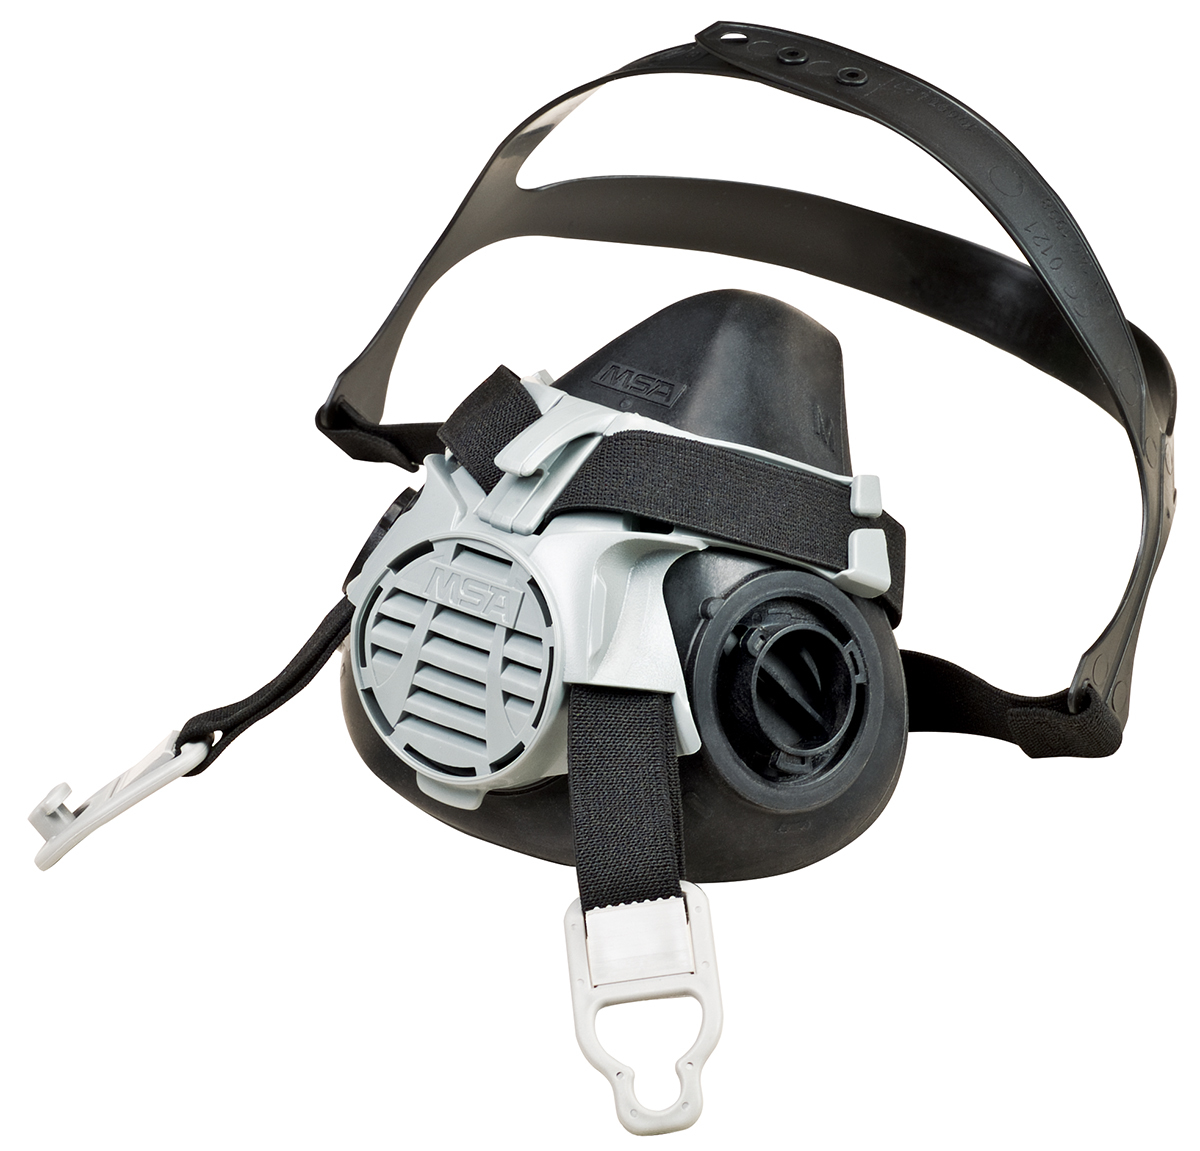 Advantage® 420 Large Advantage® 420 Series Half Mask Air Purifying Respirator (Availability restrictions apply.)